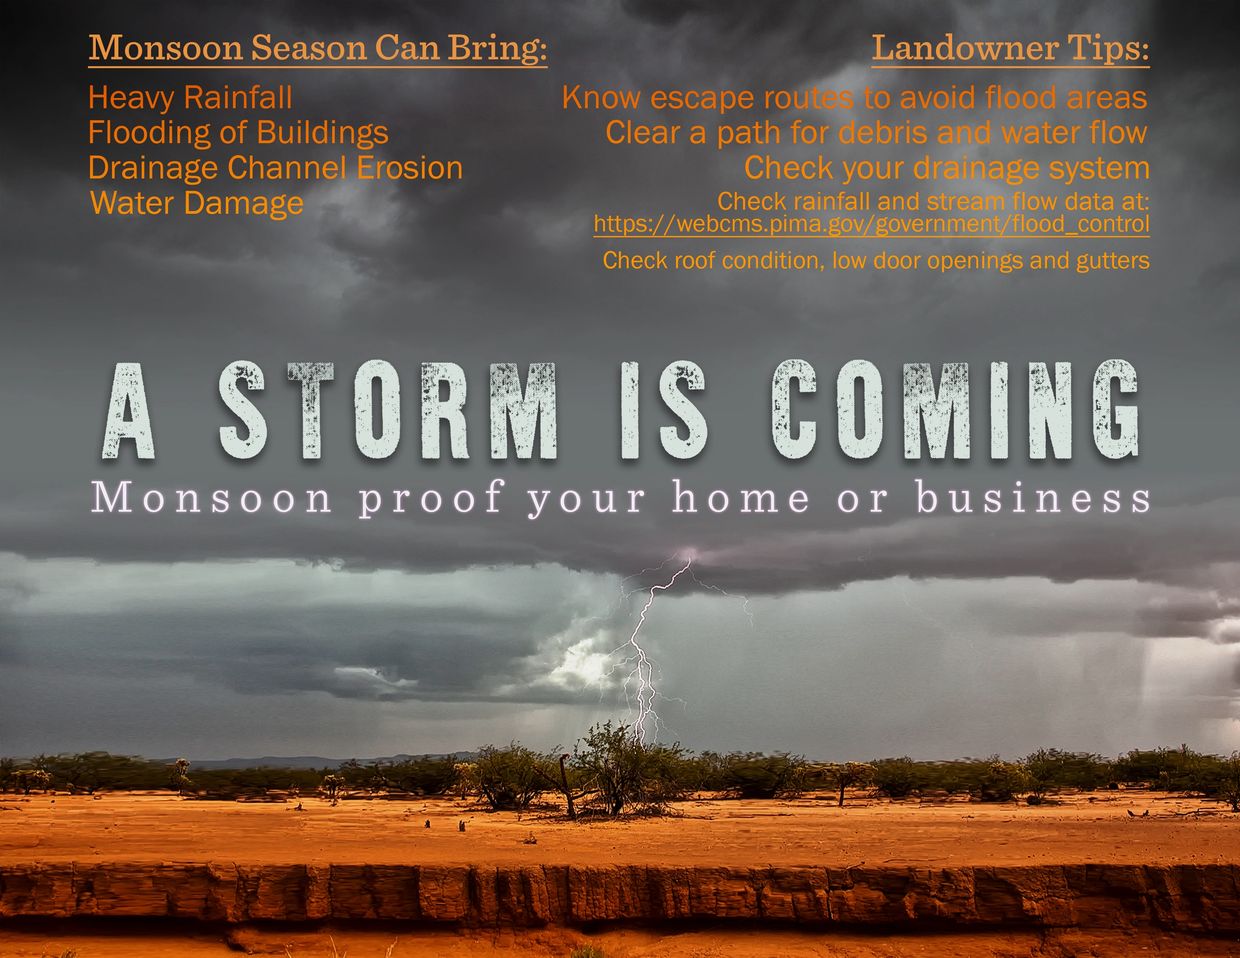 Help for homeowners and landowners about monsoon proofing their homes and land.